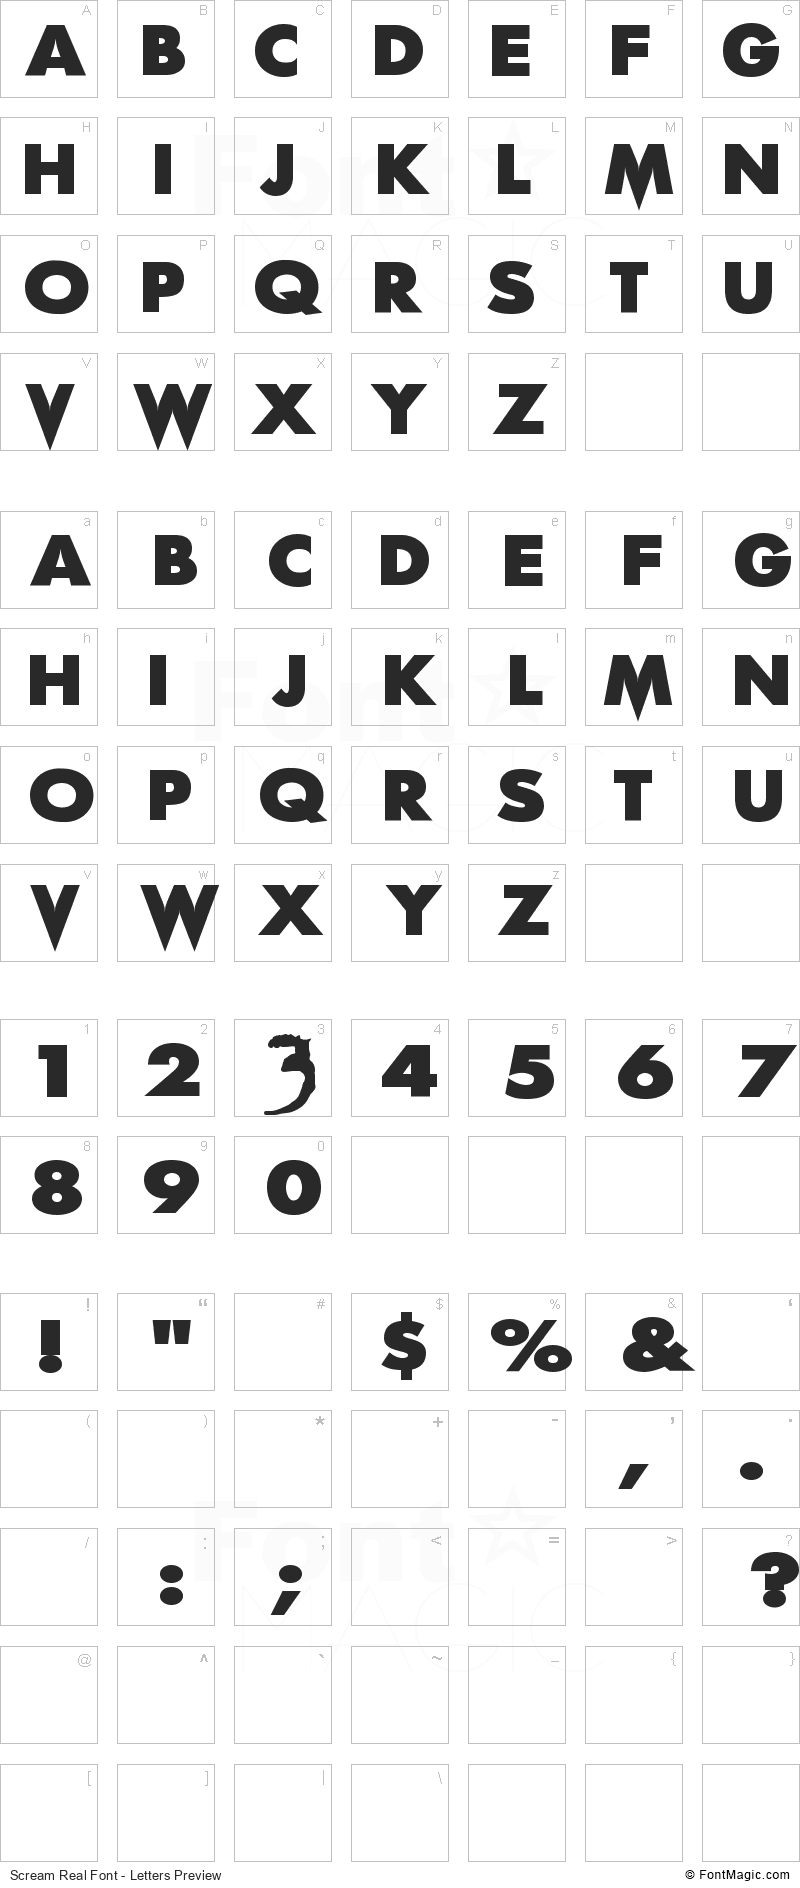 Scream Real Font - All Latters Preview Chart